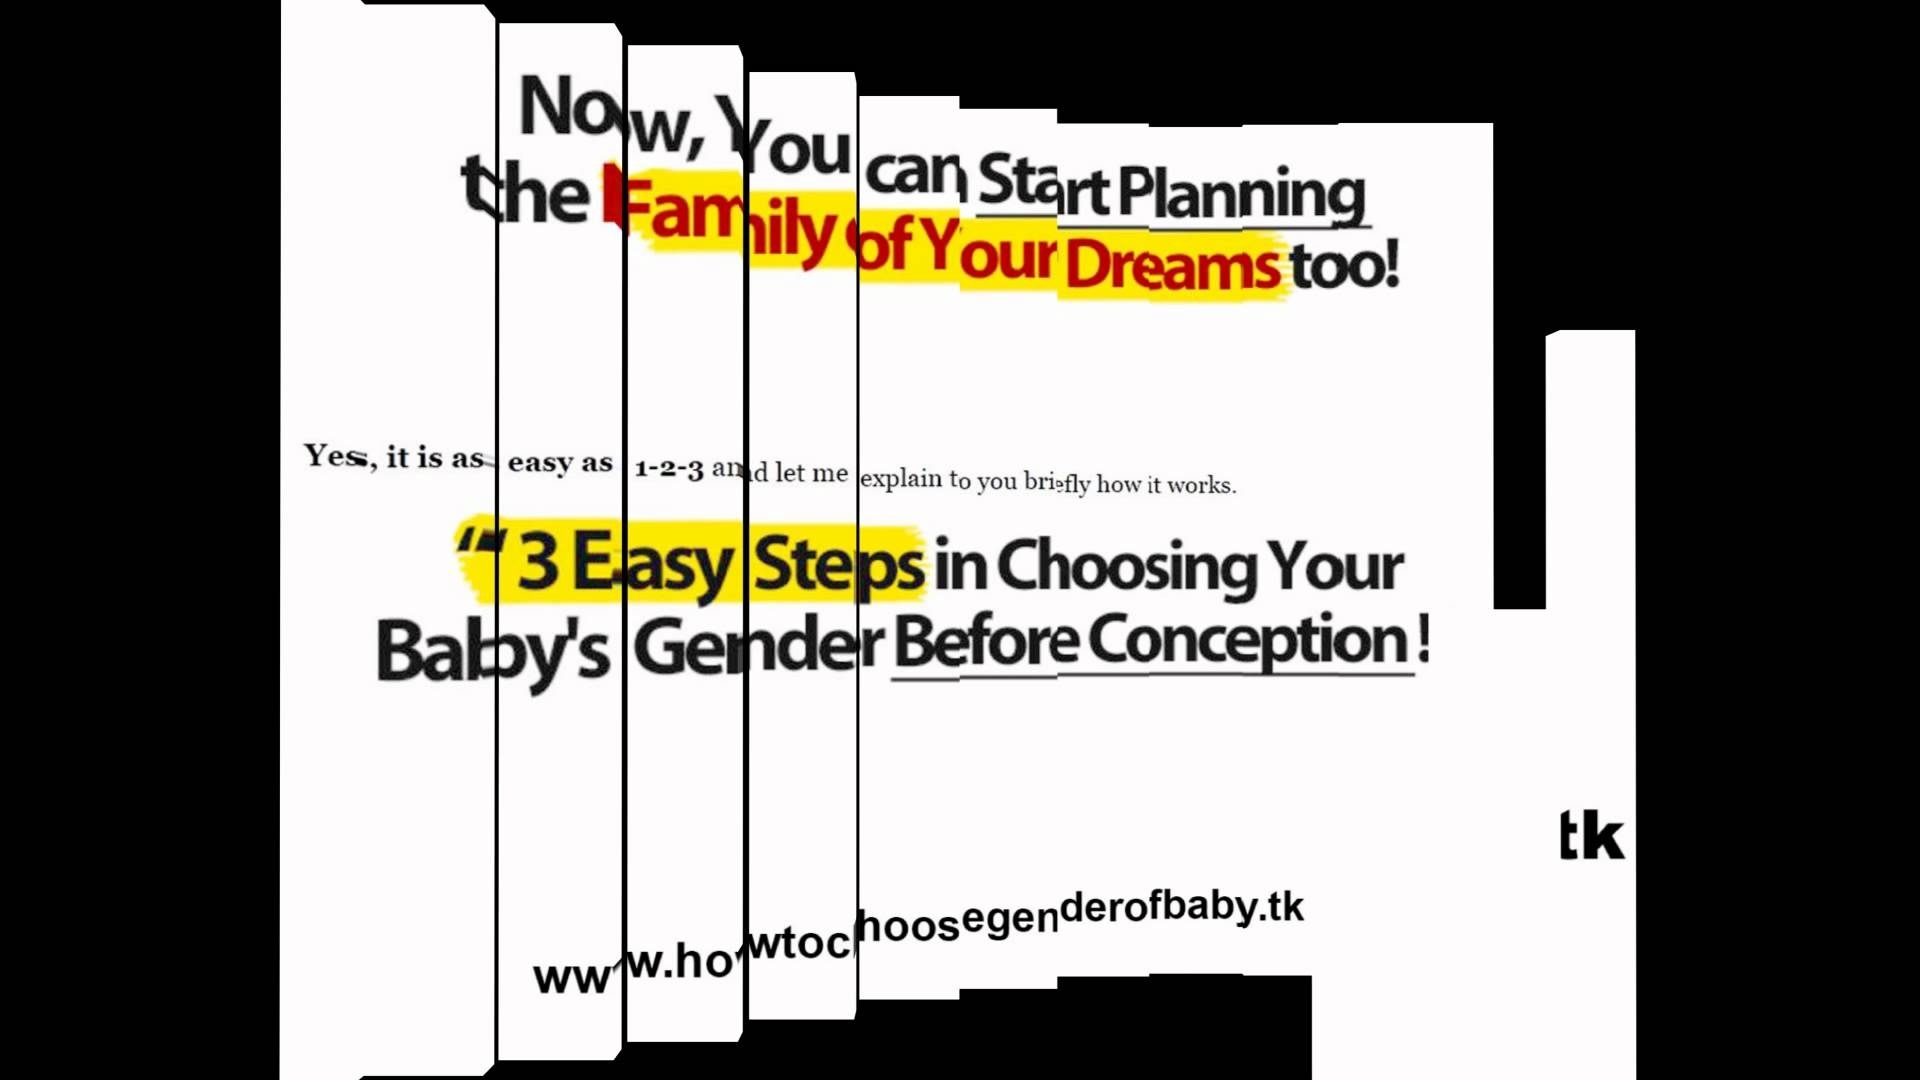 How To Choose The Gender Of Your Baby - Proven Steps On How To  How To Choose Your Babys Gender